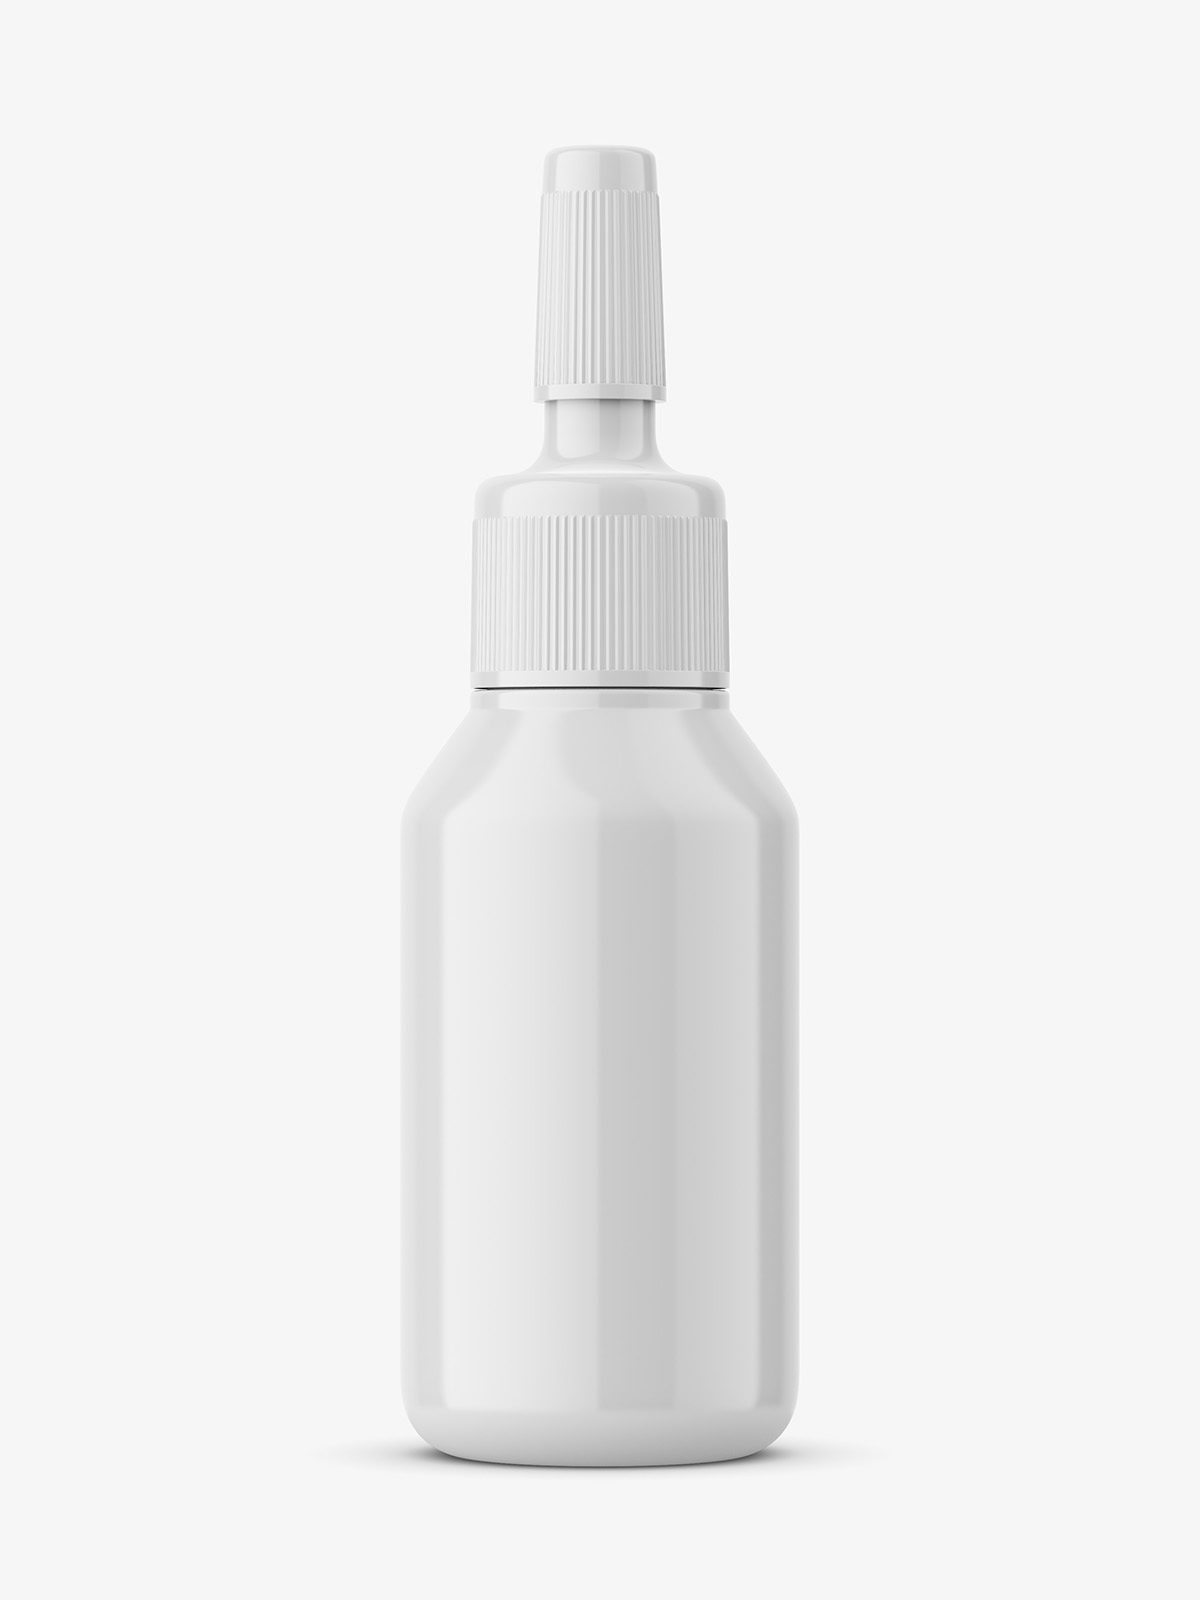 Download Glossy Plastic Ampoule Bottle Mockup Smarty Mockups Yellowimages Mockups